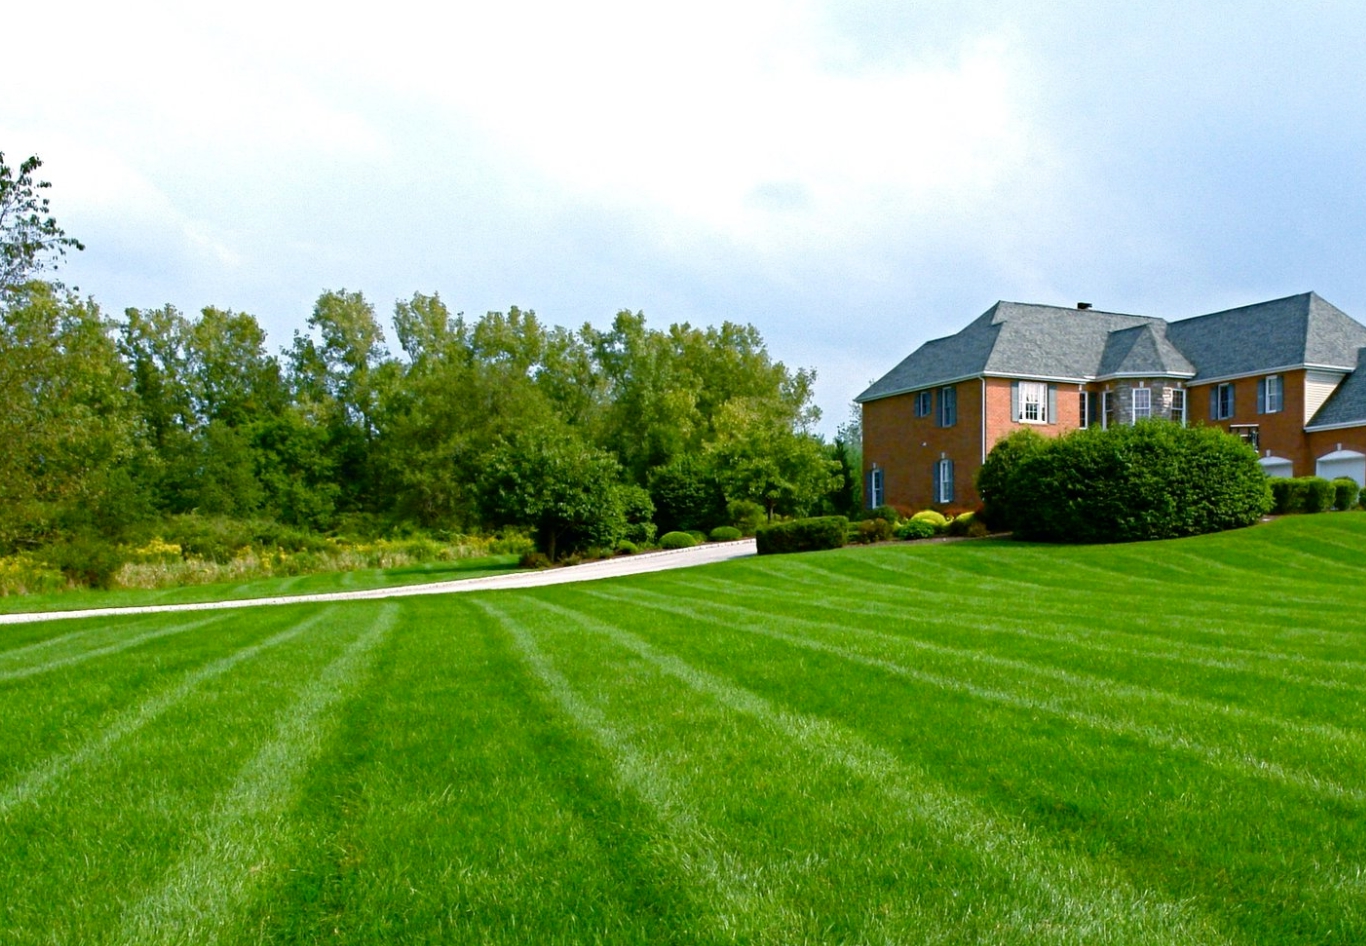 Lawn Care & Landscaping